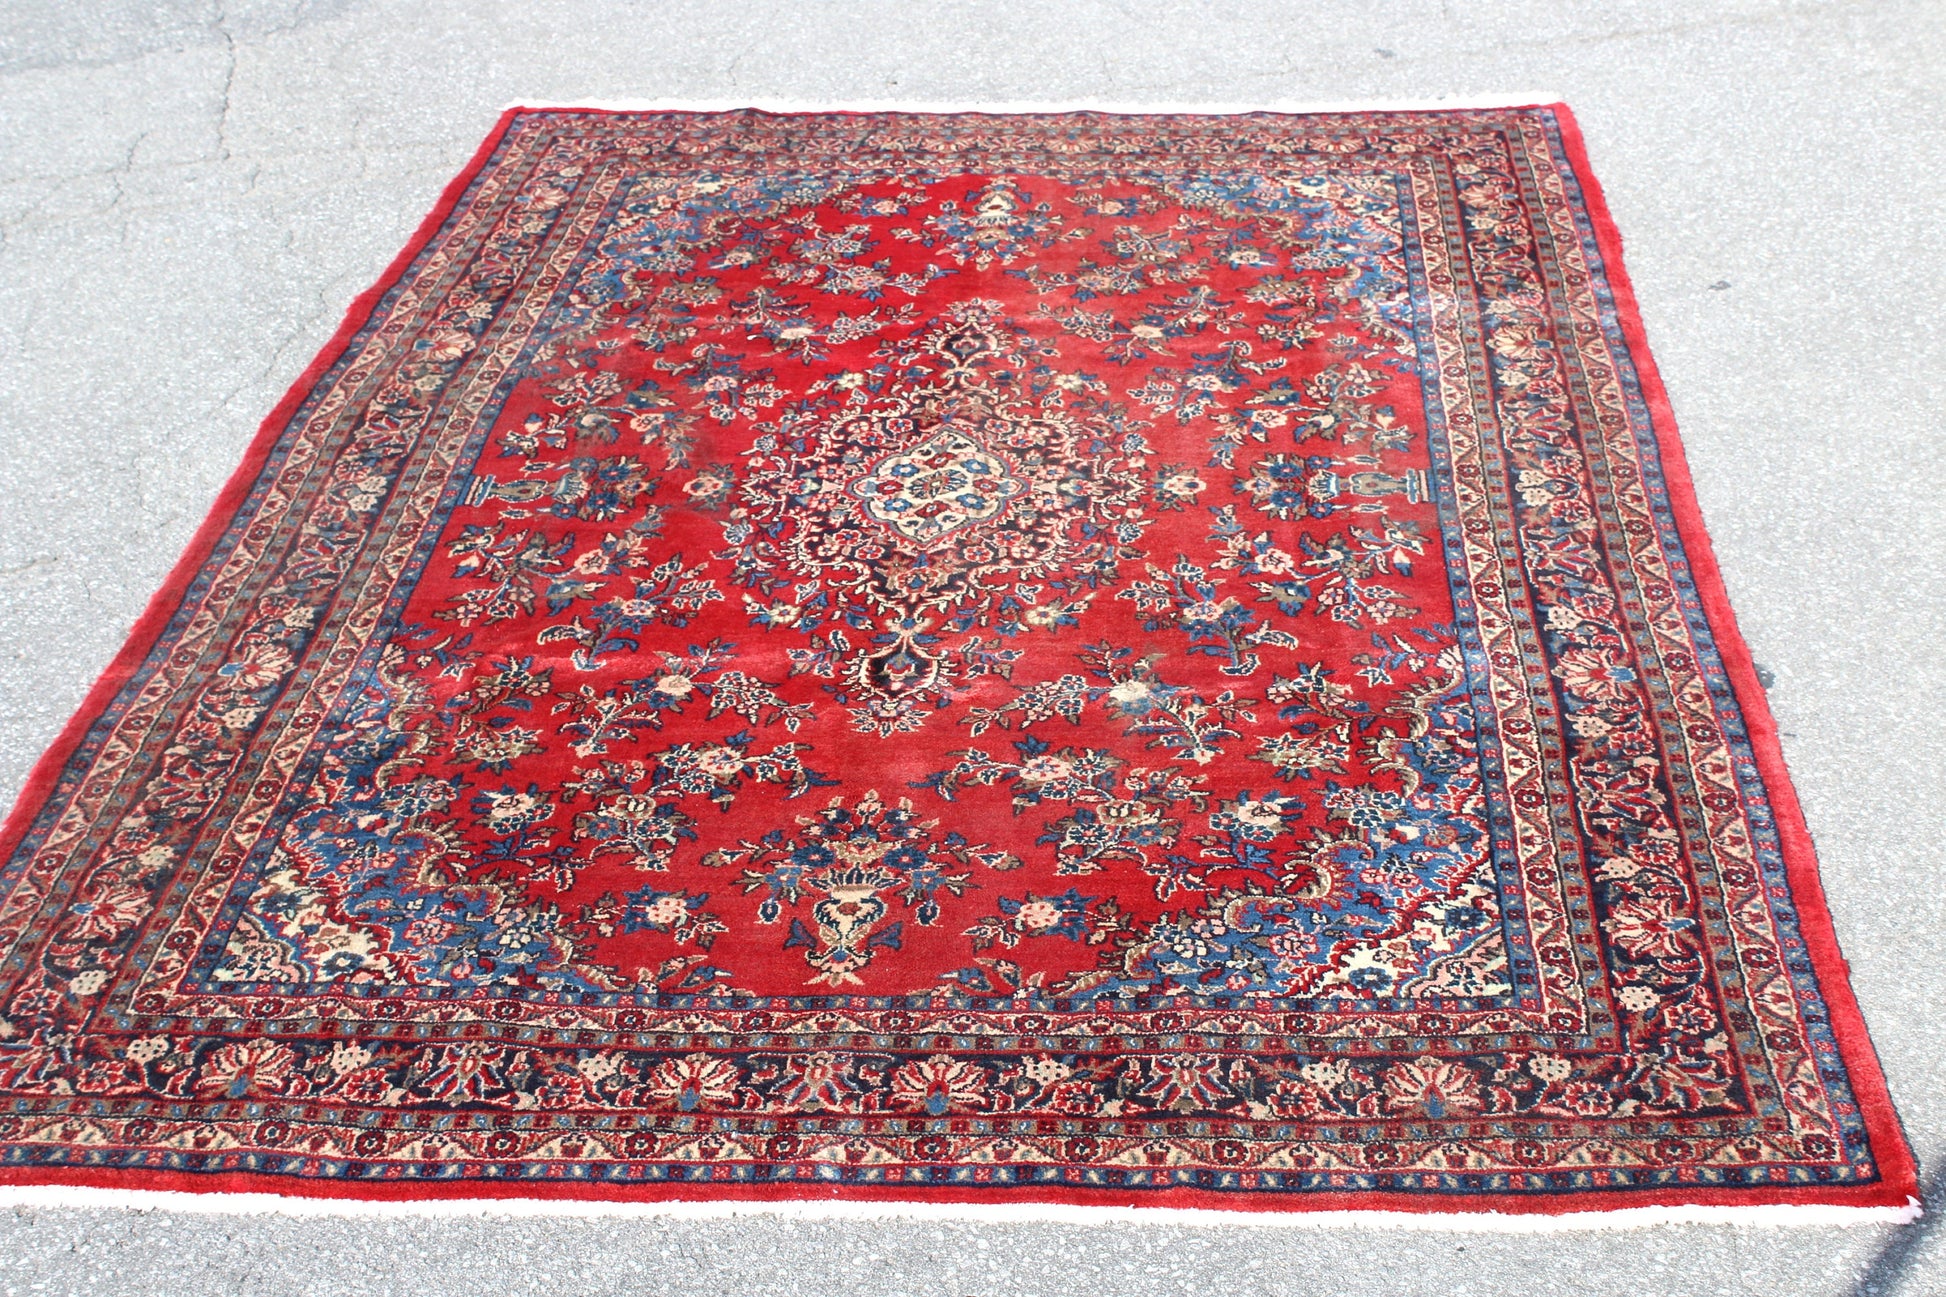 Red Oriental 7x10 Handmade Rug with Blue Borders